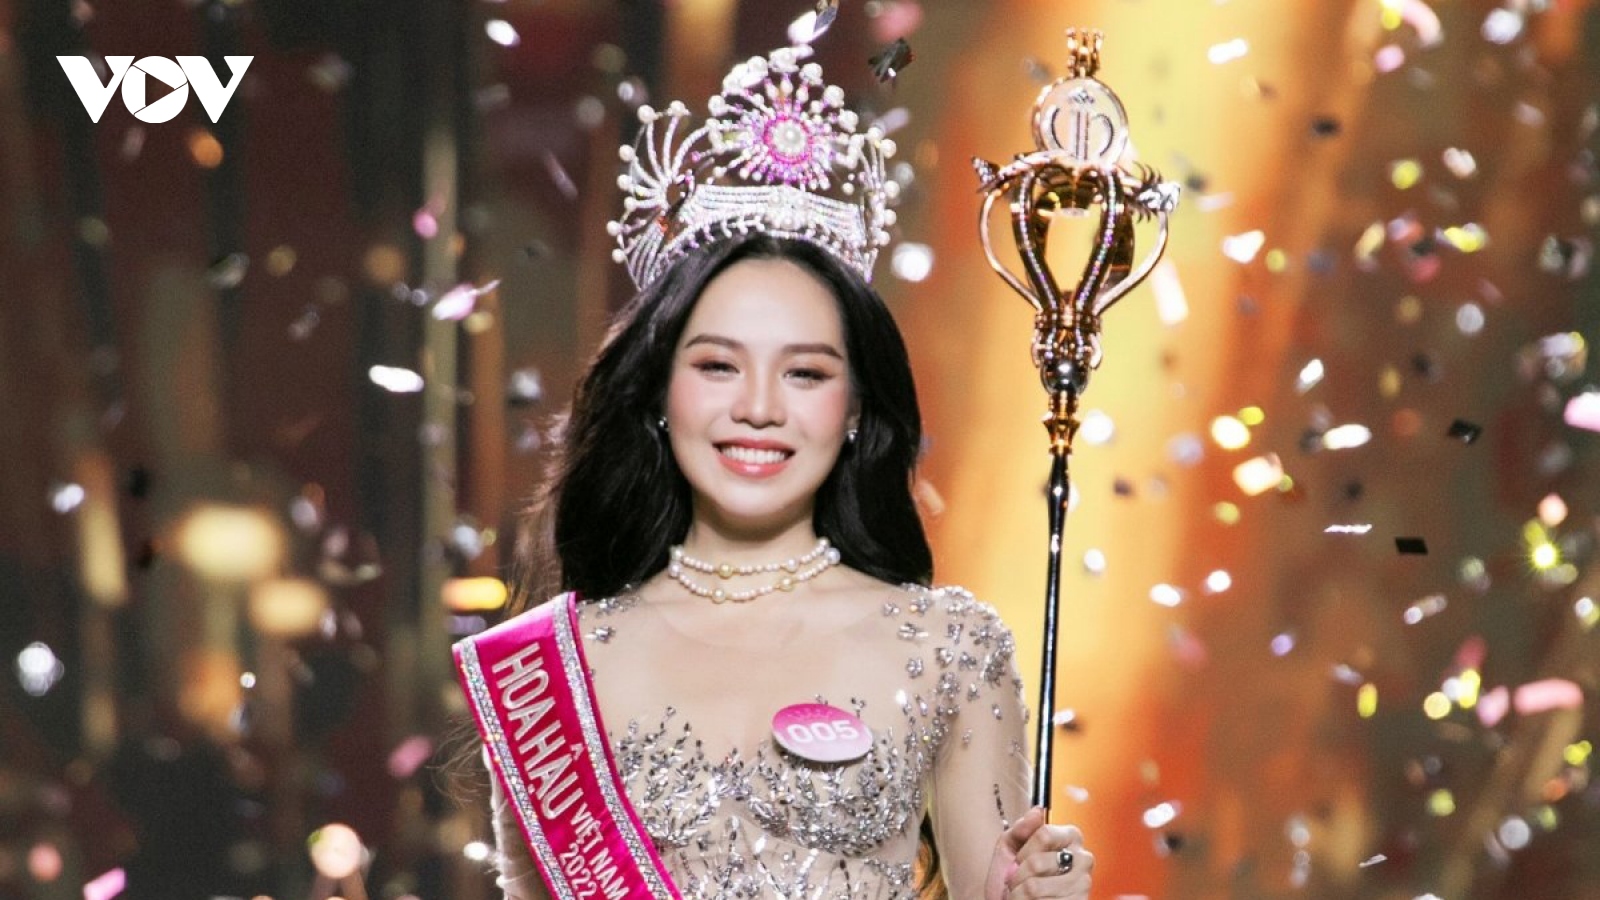 Thanh Thuy crowned Miss Vietnam to become 11th beauty queen of 2022